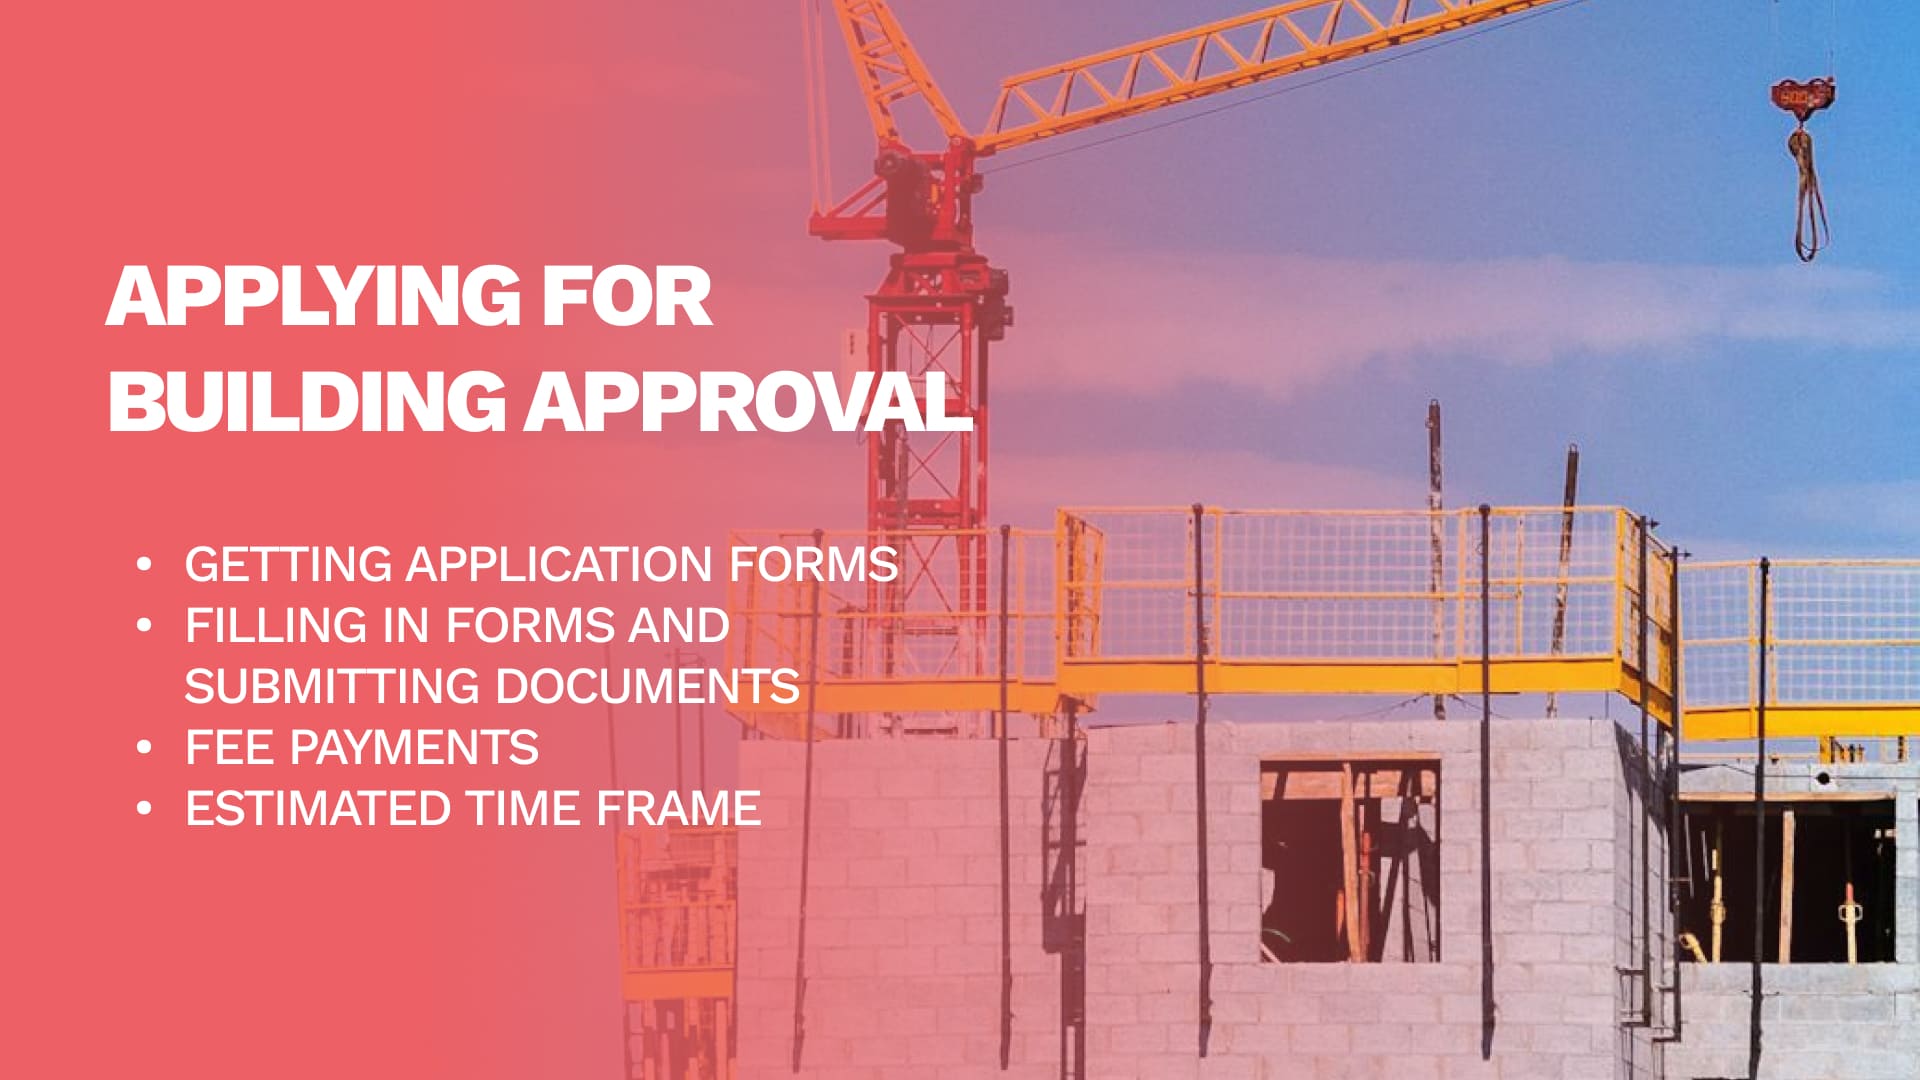 Applying for Building Approval